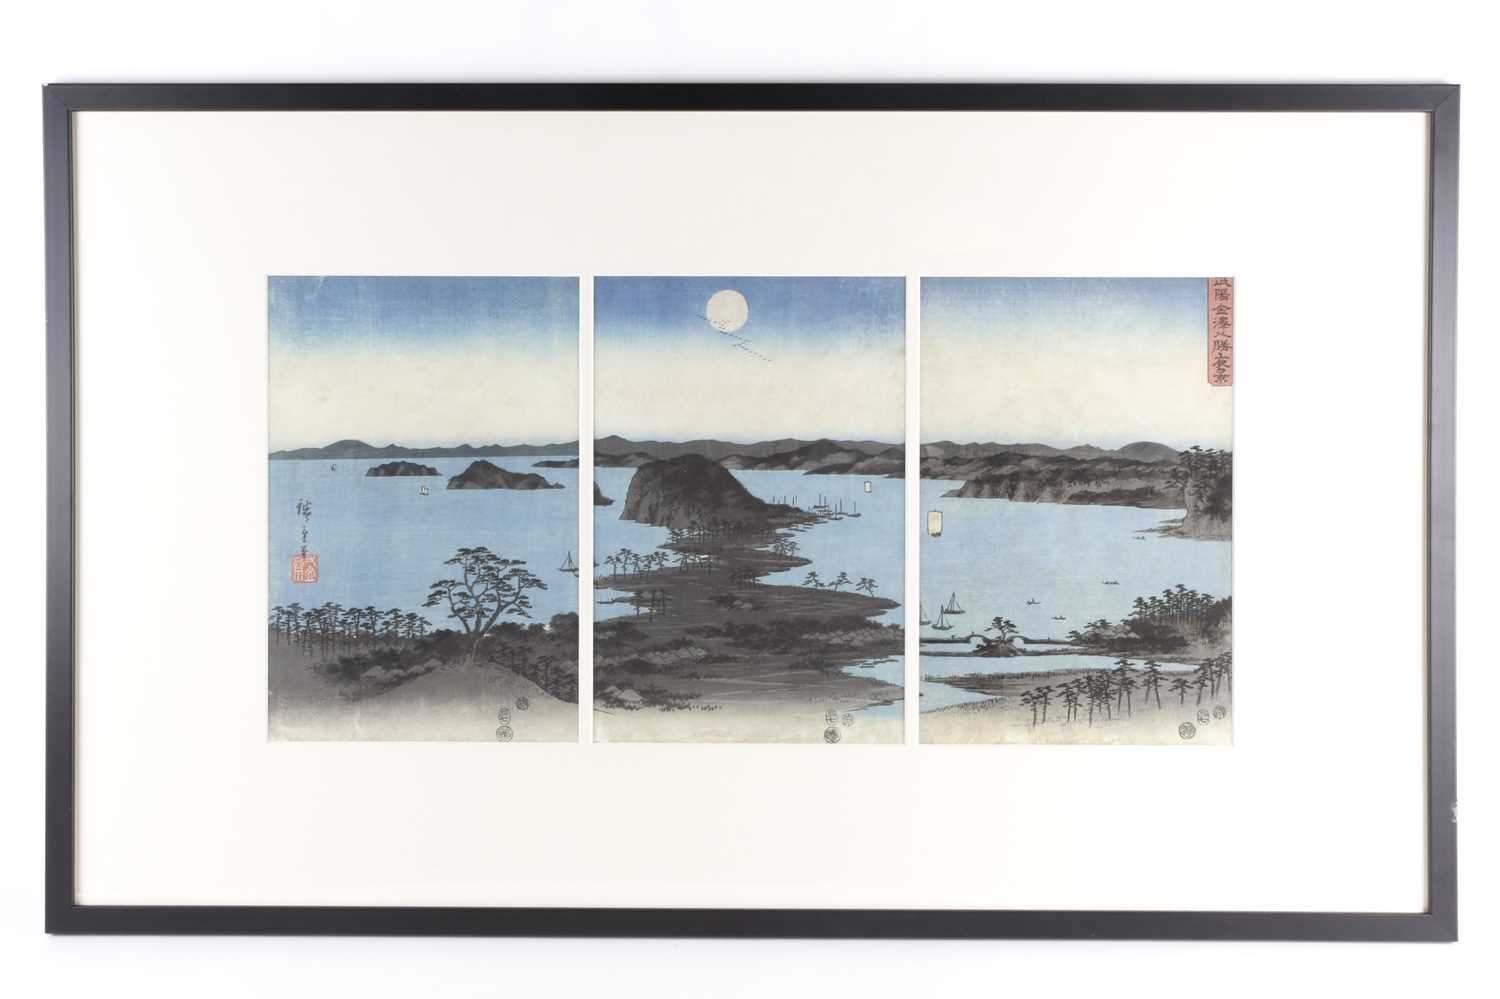 After Utagawa Hiroshige (Japanese, 1797 - 1858), ' Evening View of the Eight Famous Sites at